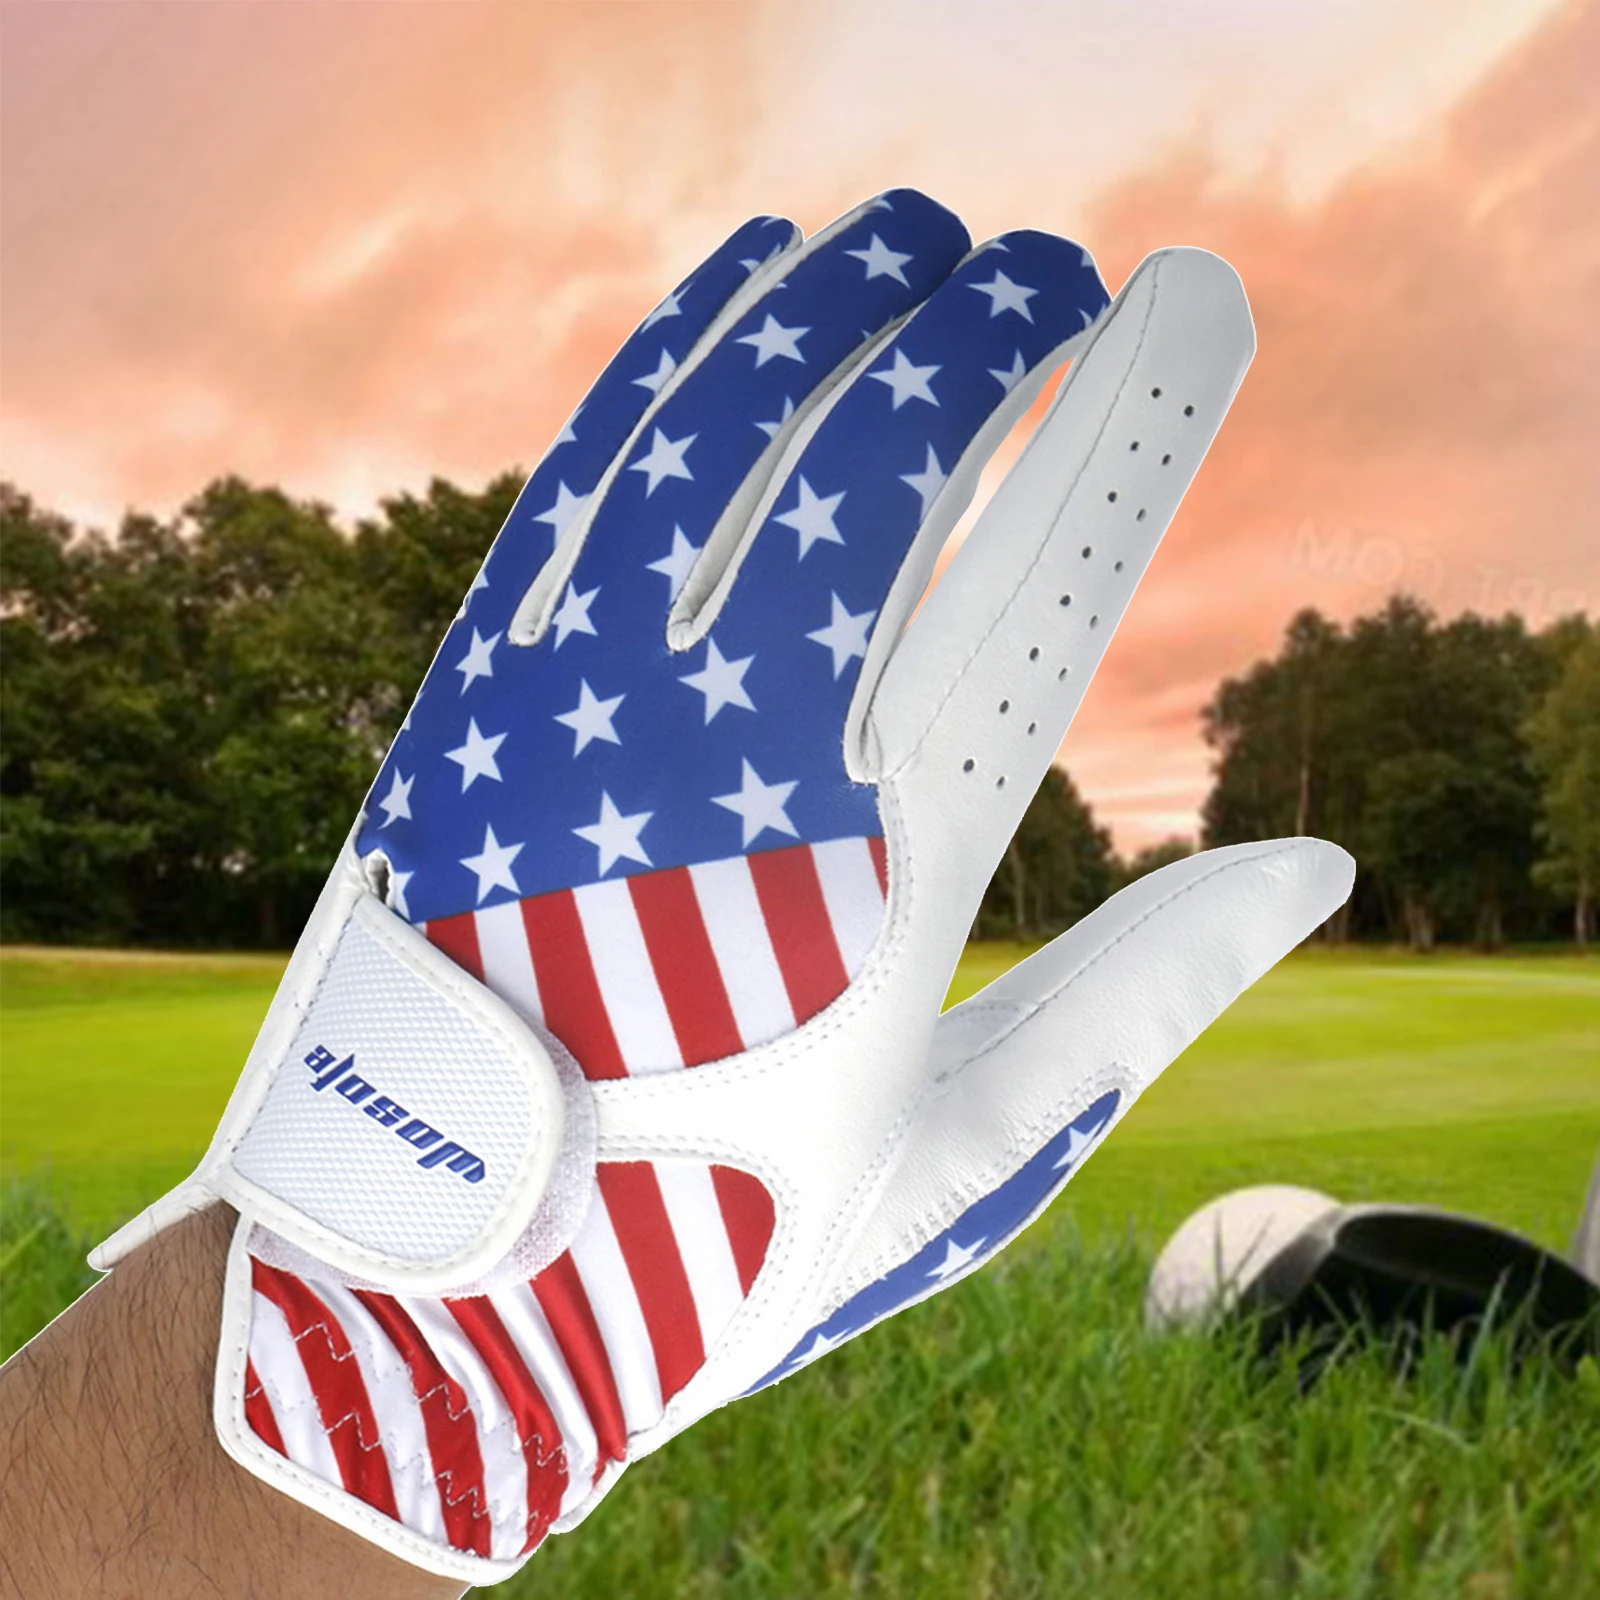 Golf Gloves Soft Left Hand Comfortable Durable Breathable Wear-Resistant On-Slip Single Golf Mittens for Outdoor Sports